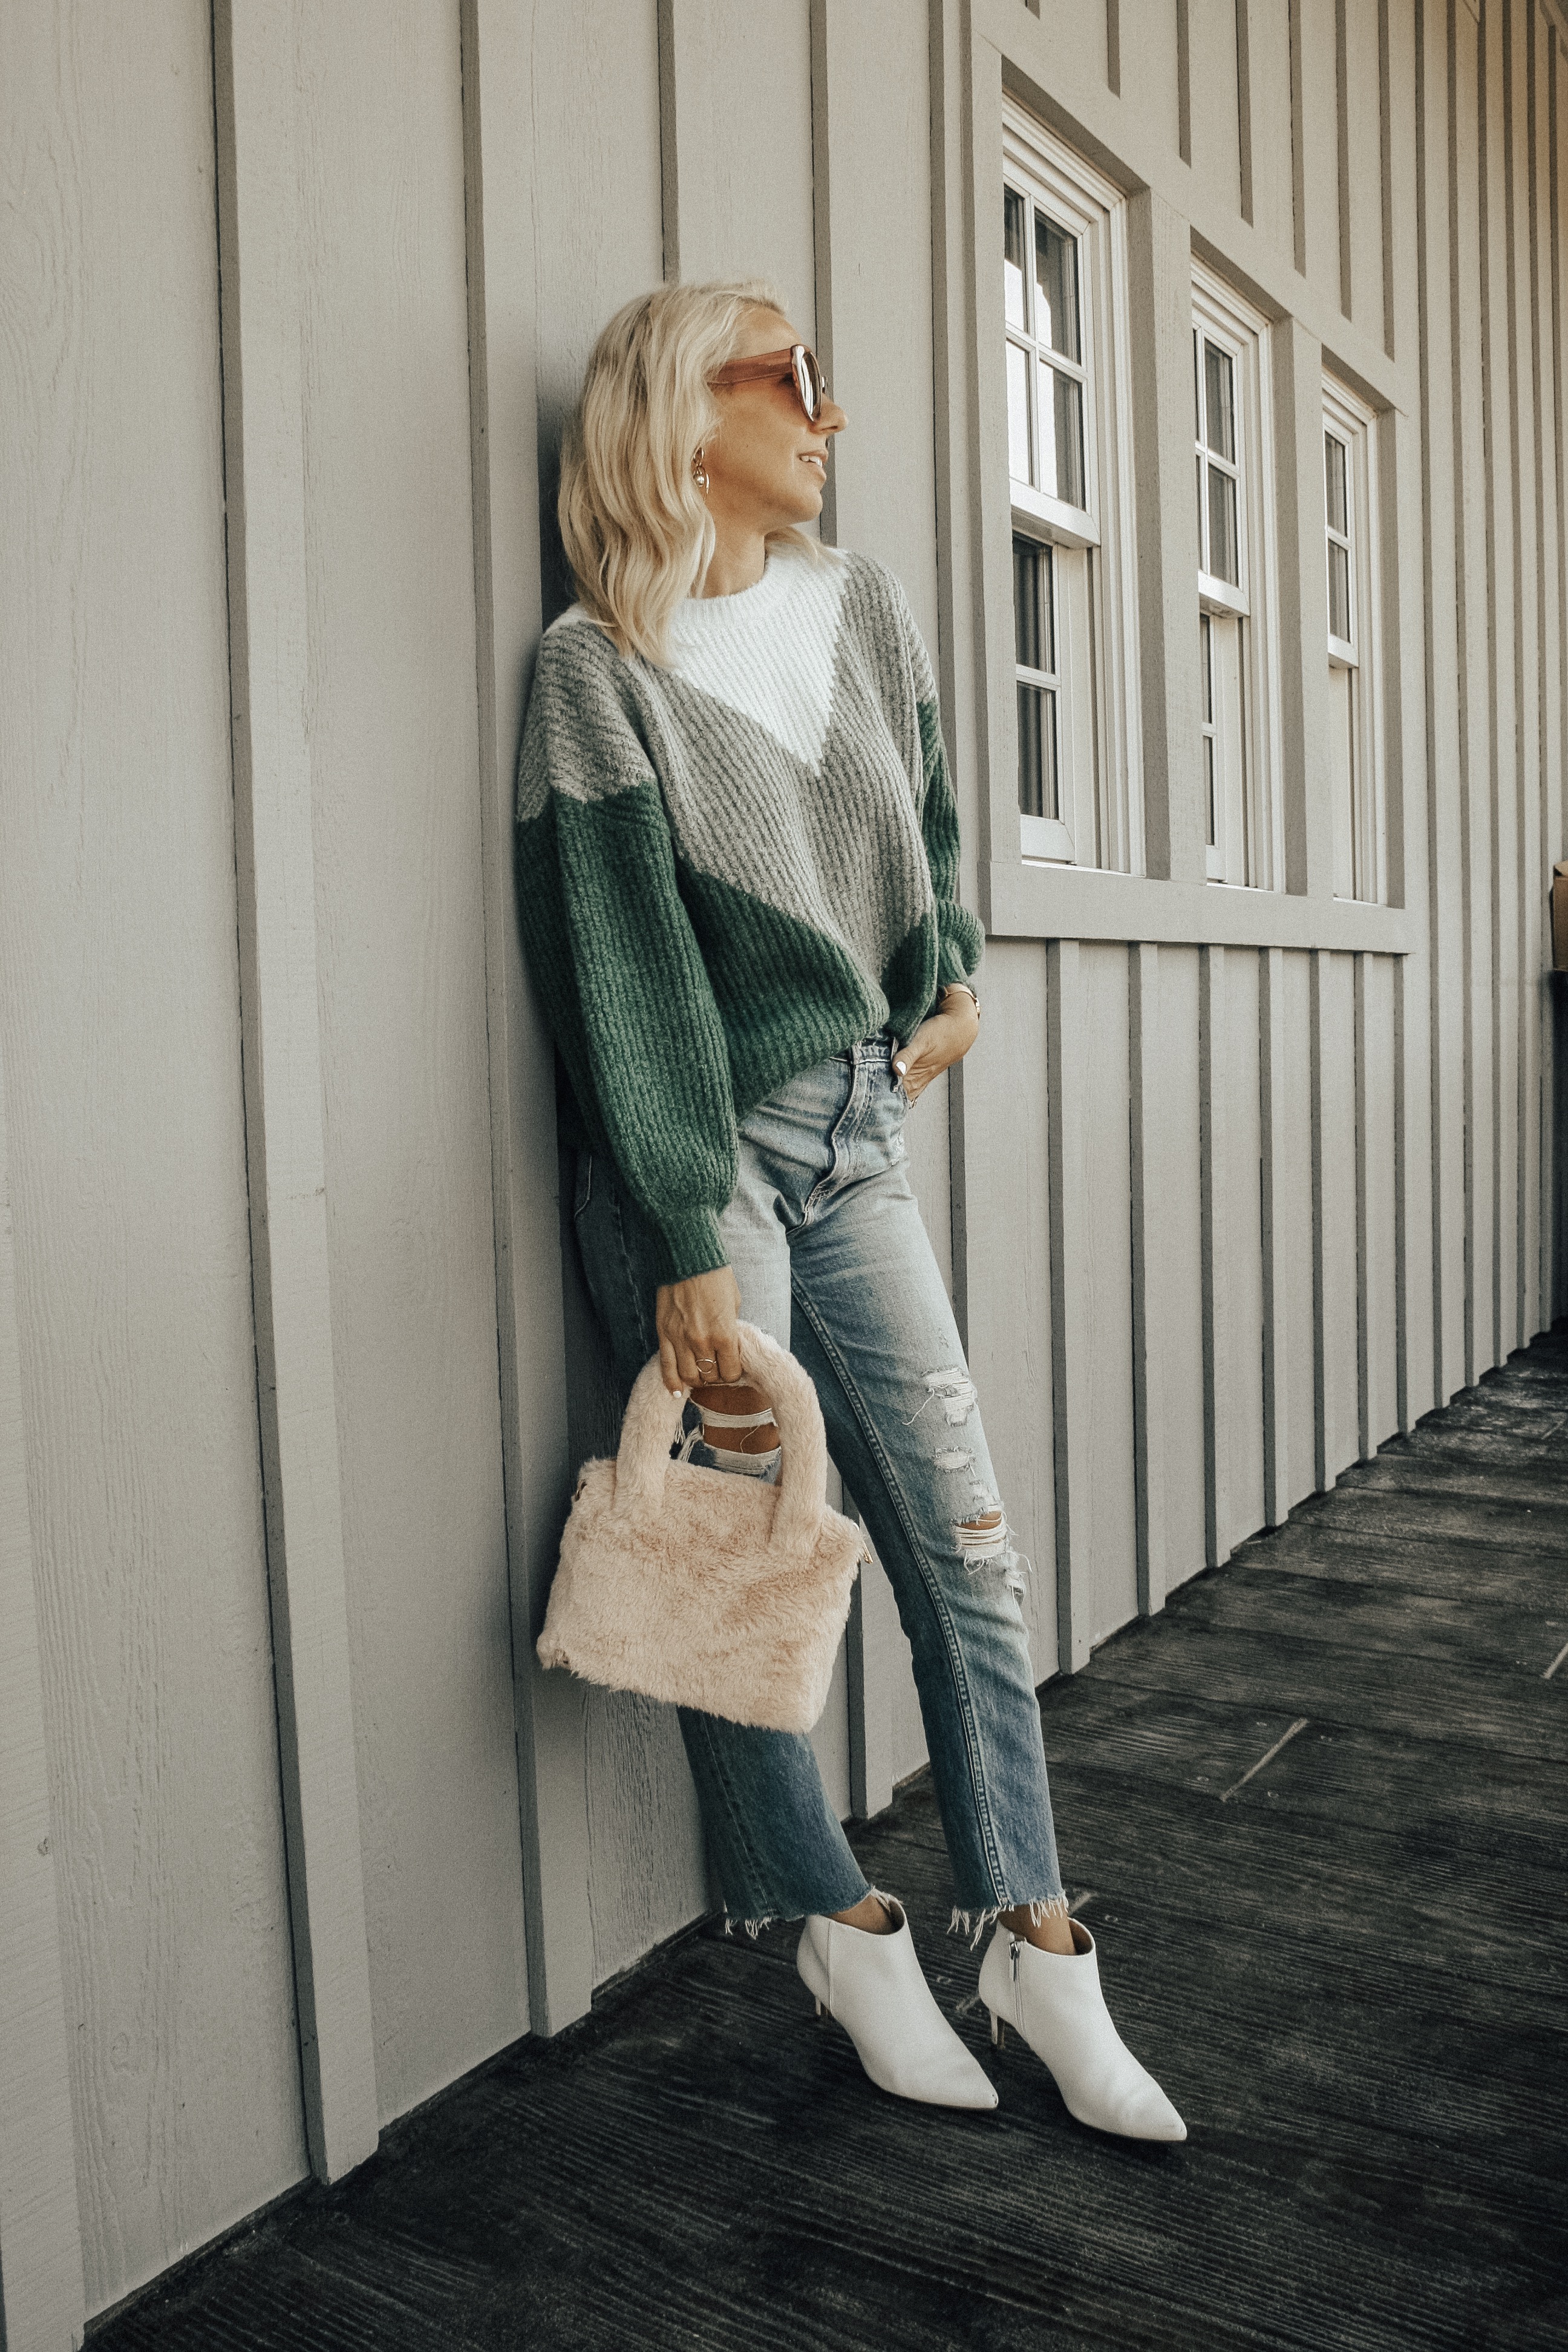 COZY SWEATERS UNDER $35- Jaclyn De Leon Style + casual sweater + chevron print + fall fashion + #sweaterweather + affordable fashion + winter style + casual street style + denim + mom style + stripes + faux fur handbag + retro style + oversized sunglasses + forever 21